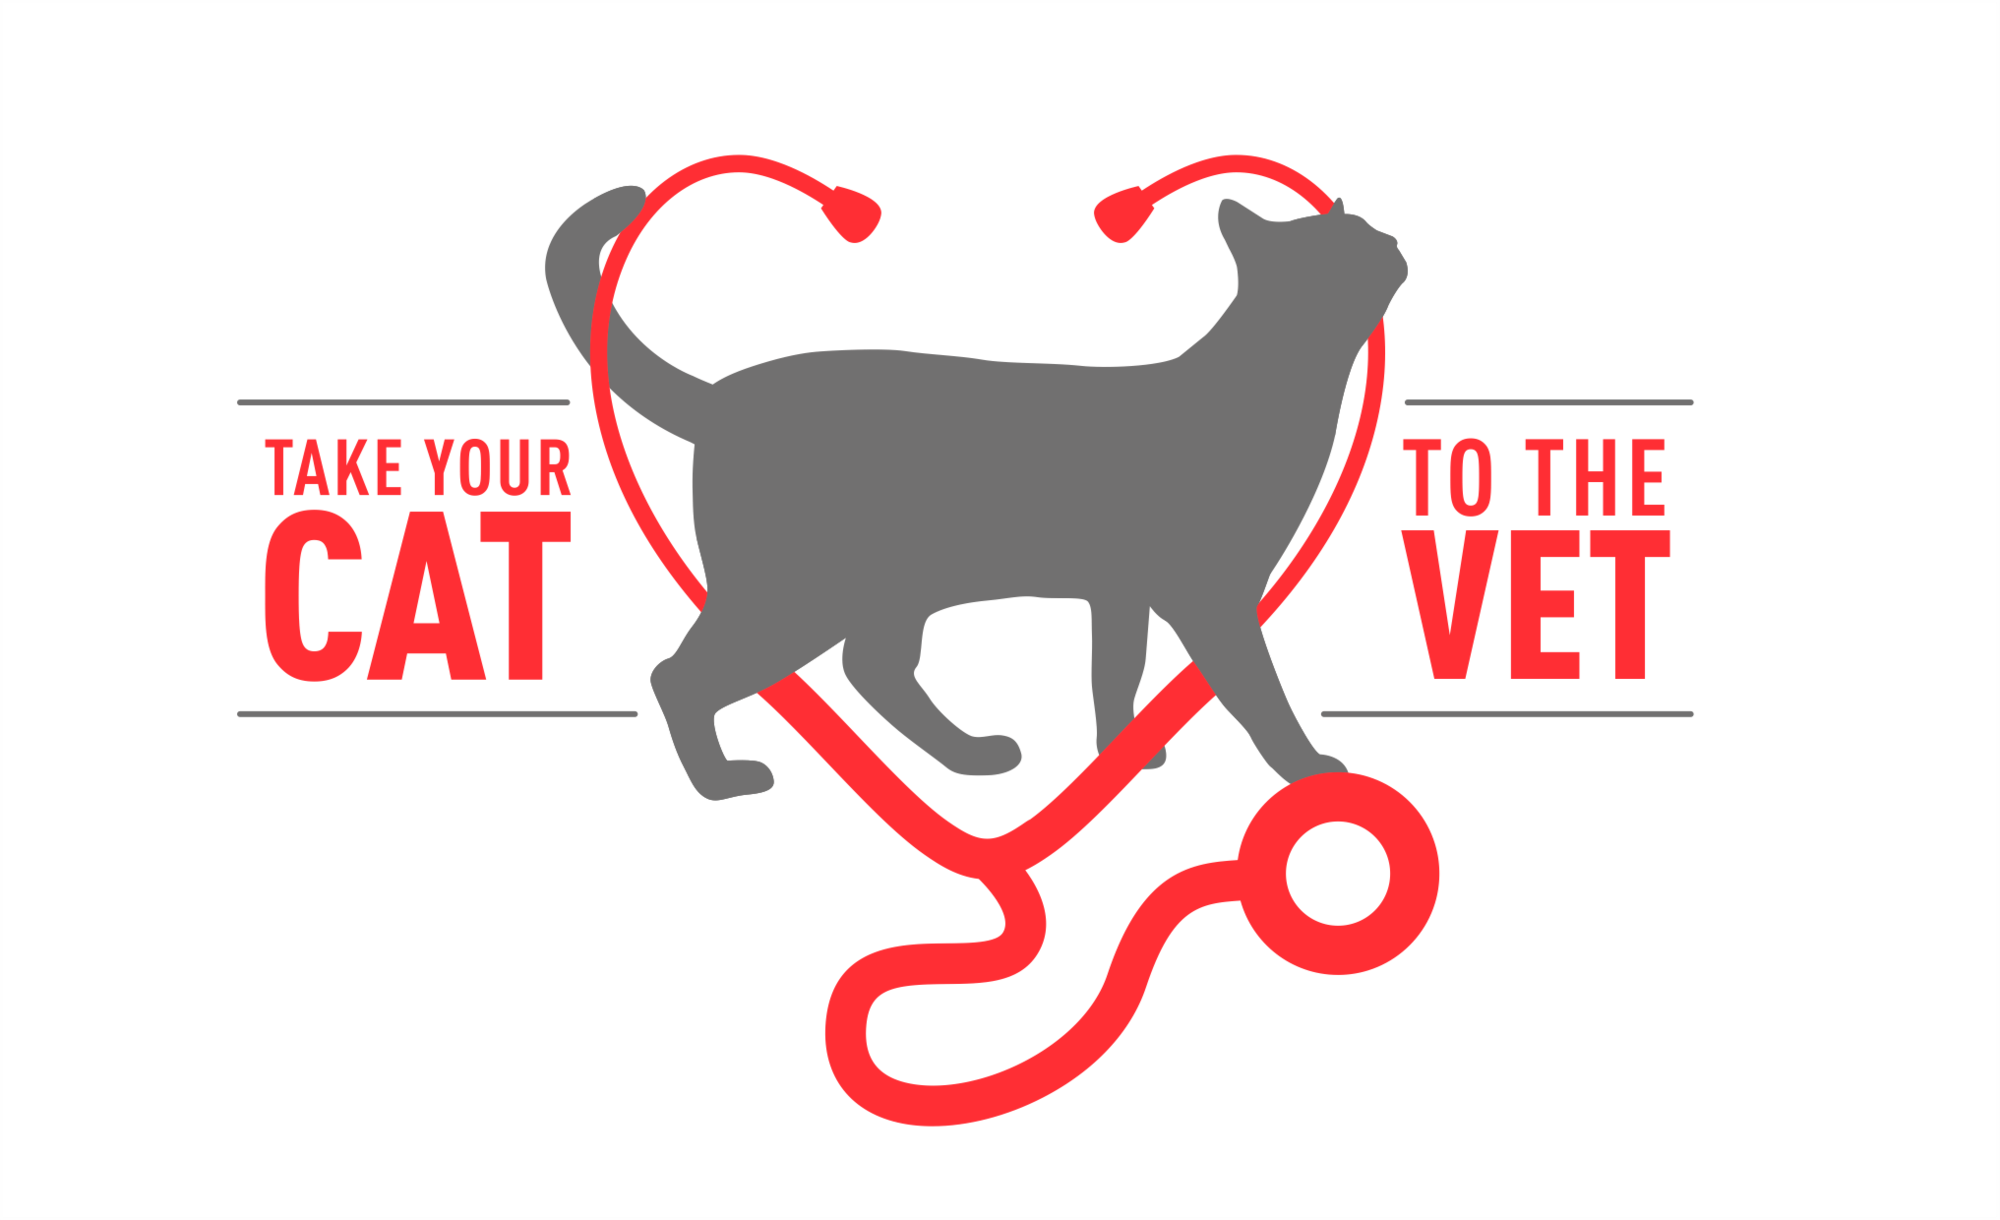 Take your cat to the vet logo